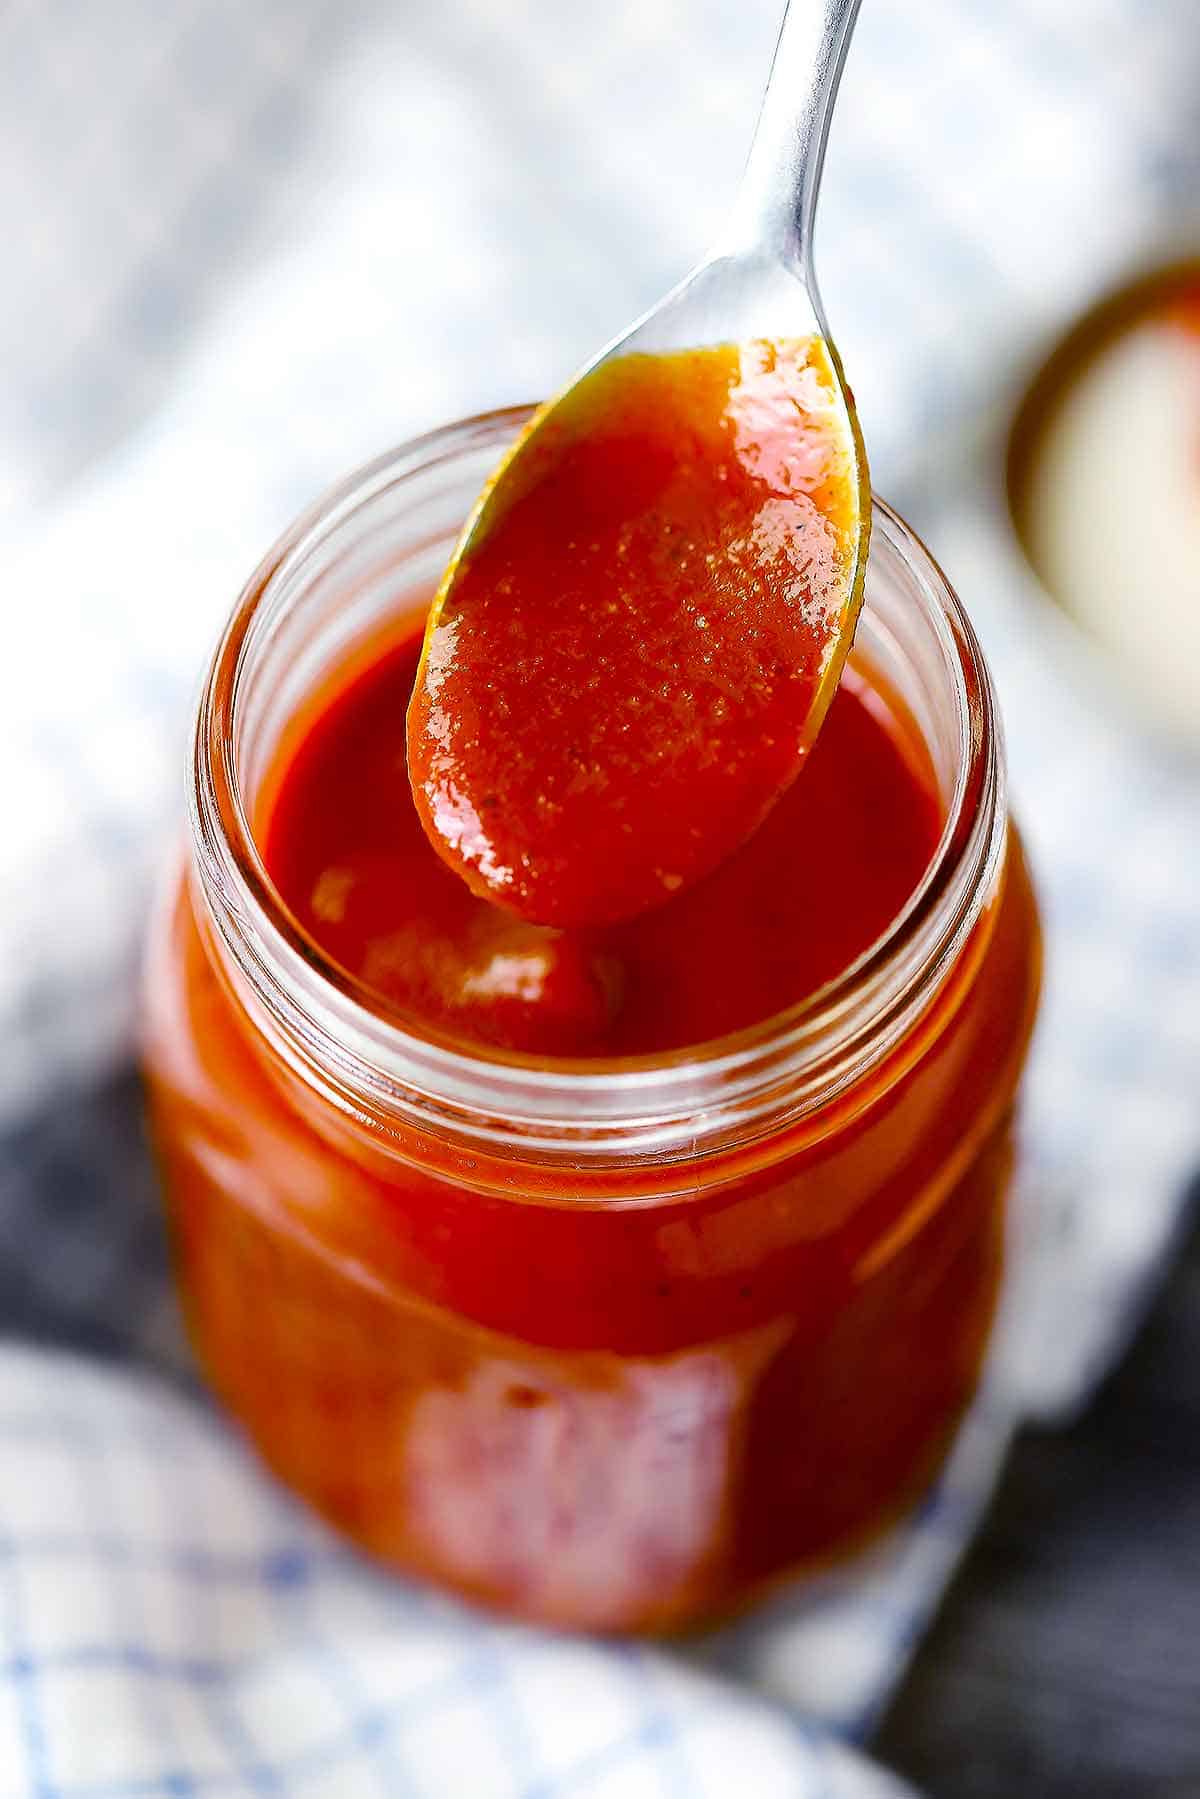 A jar of homemade barbecue sauce with a spoonful hovering above.